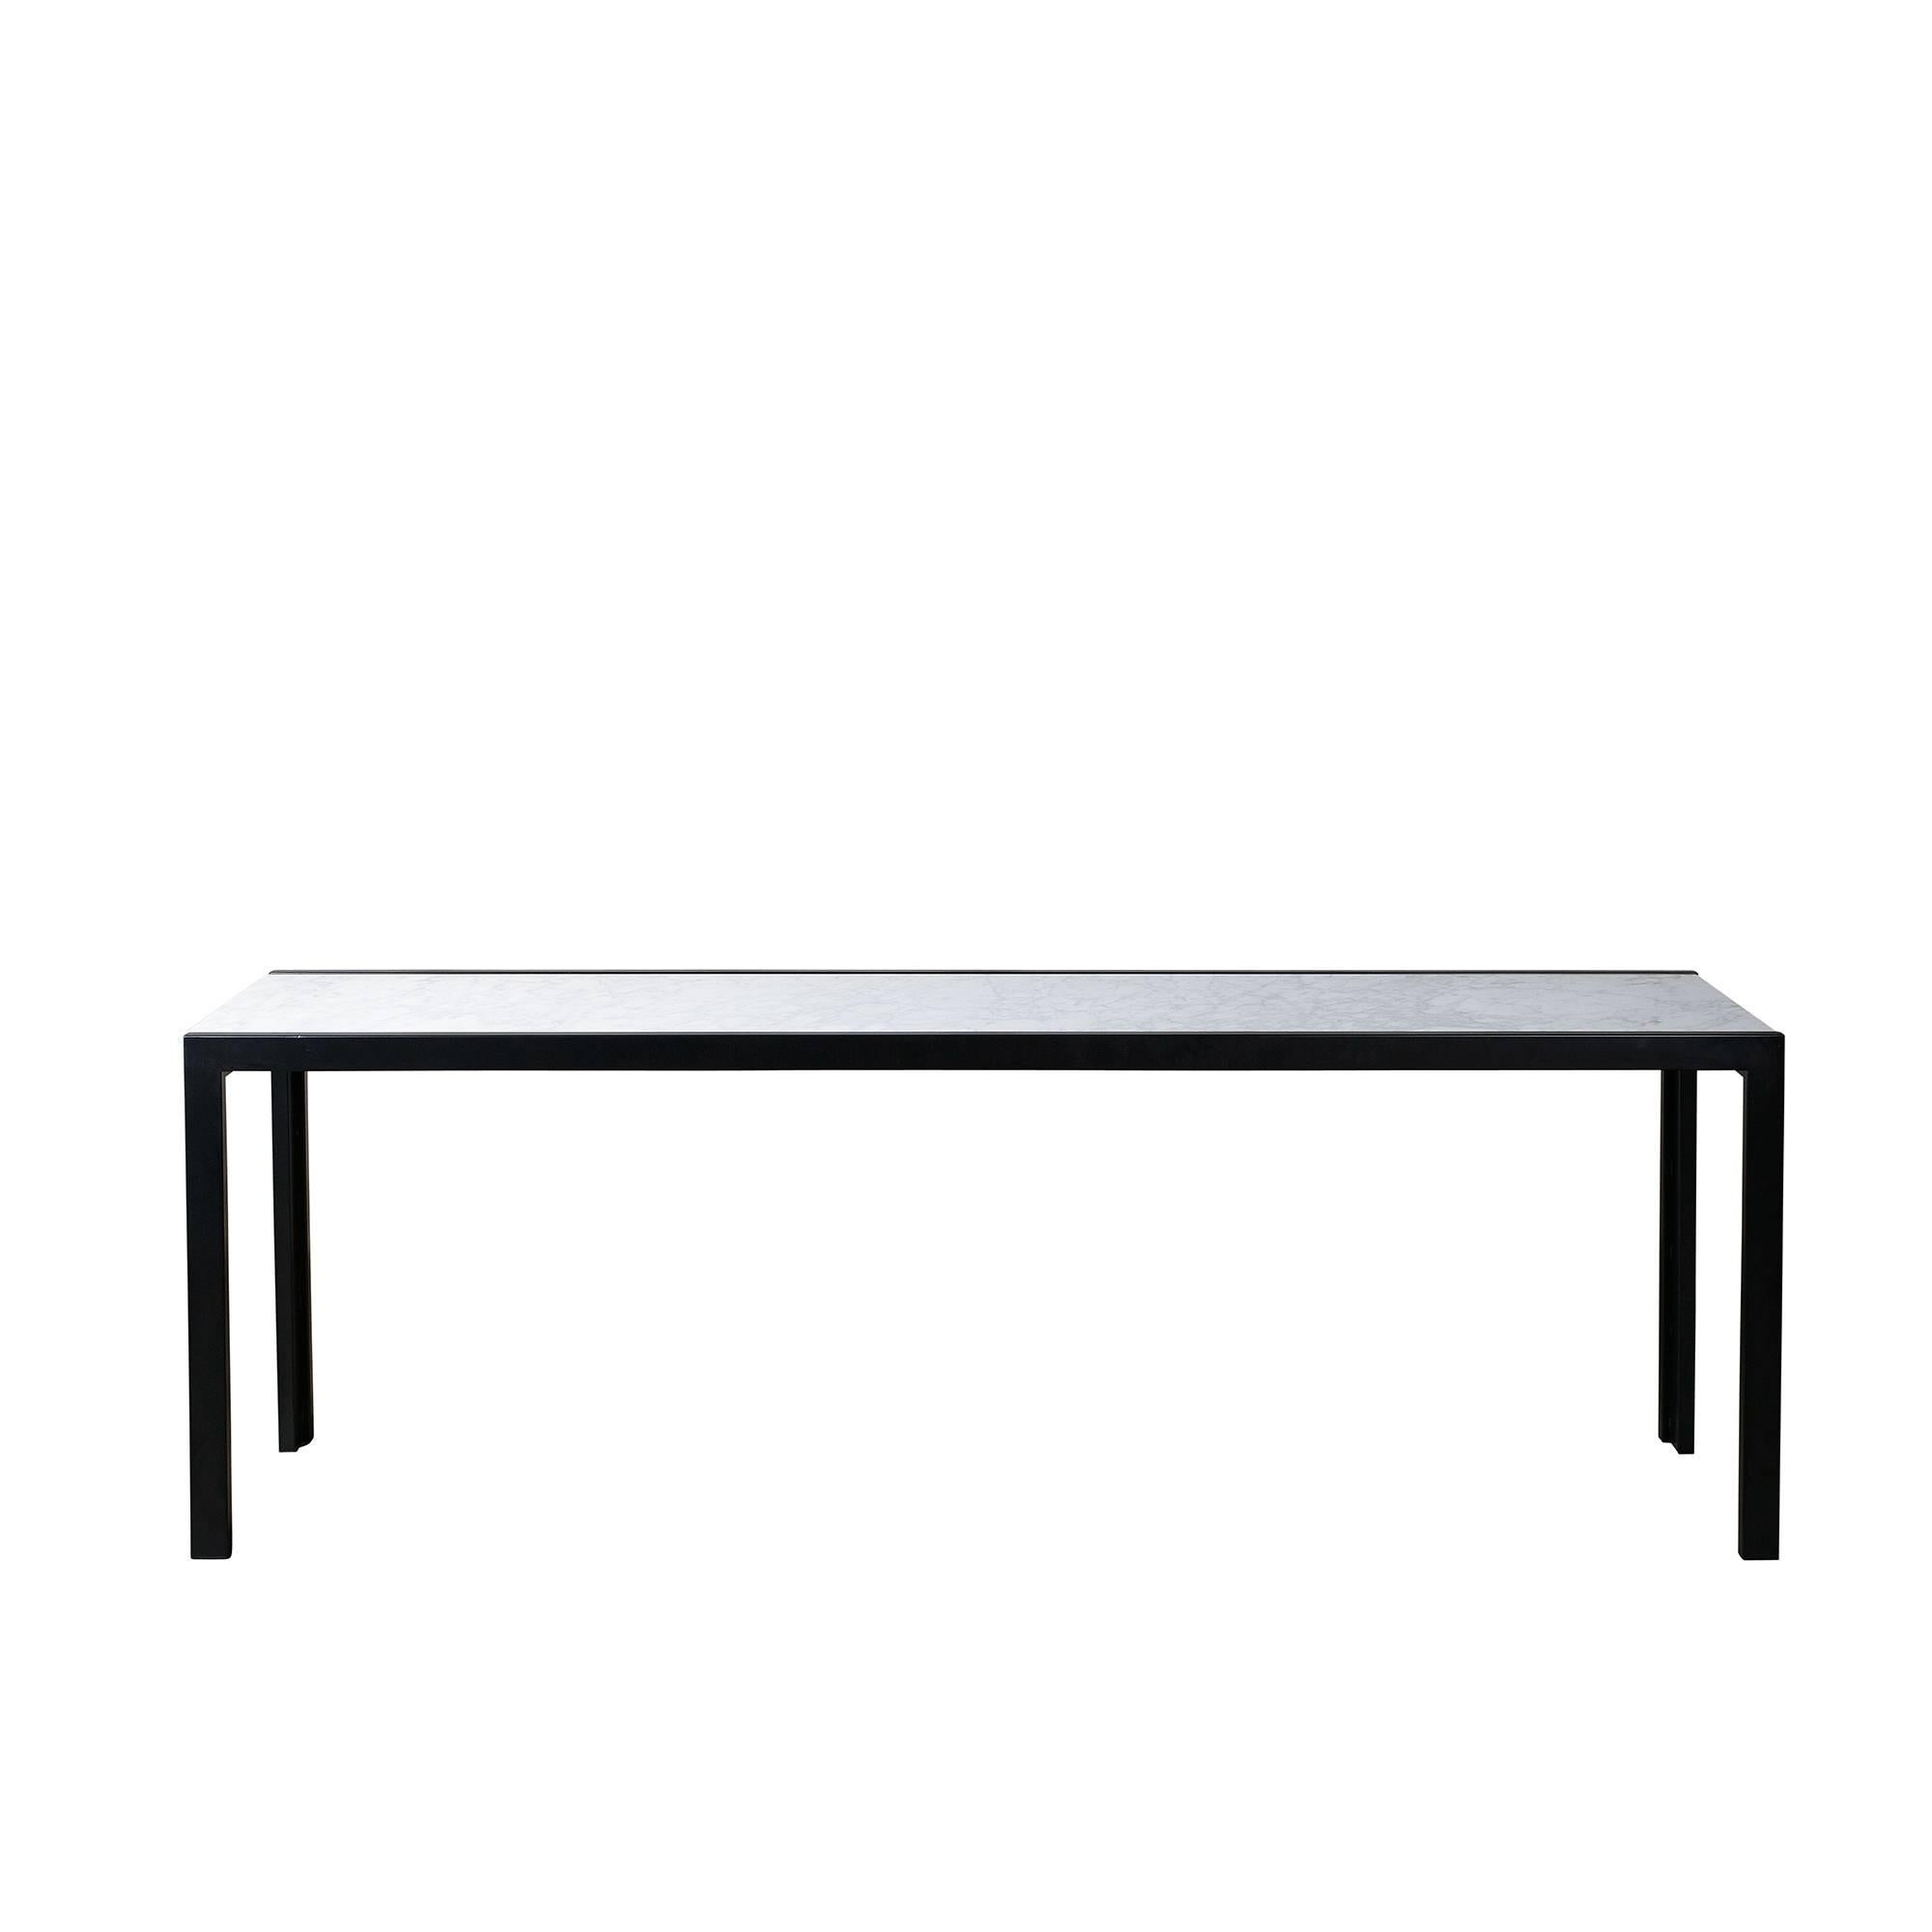 Narrow marble top console with black steel base